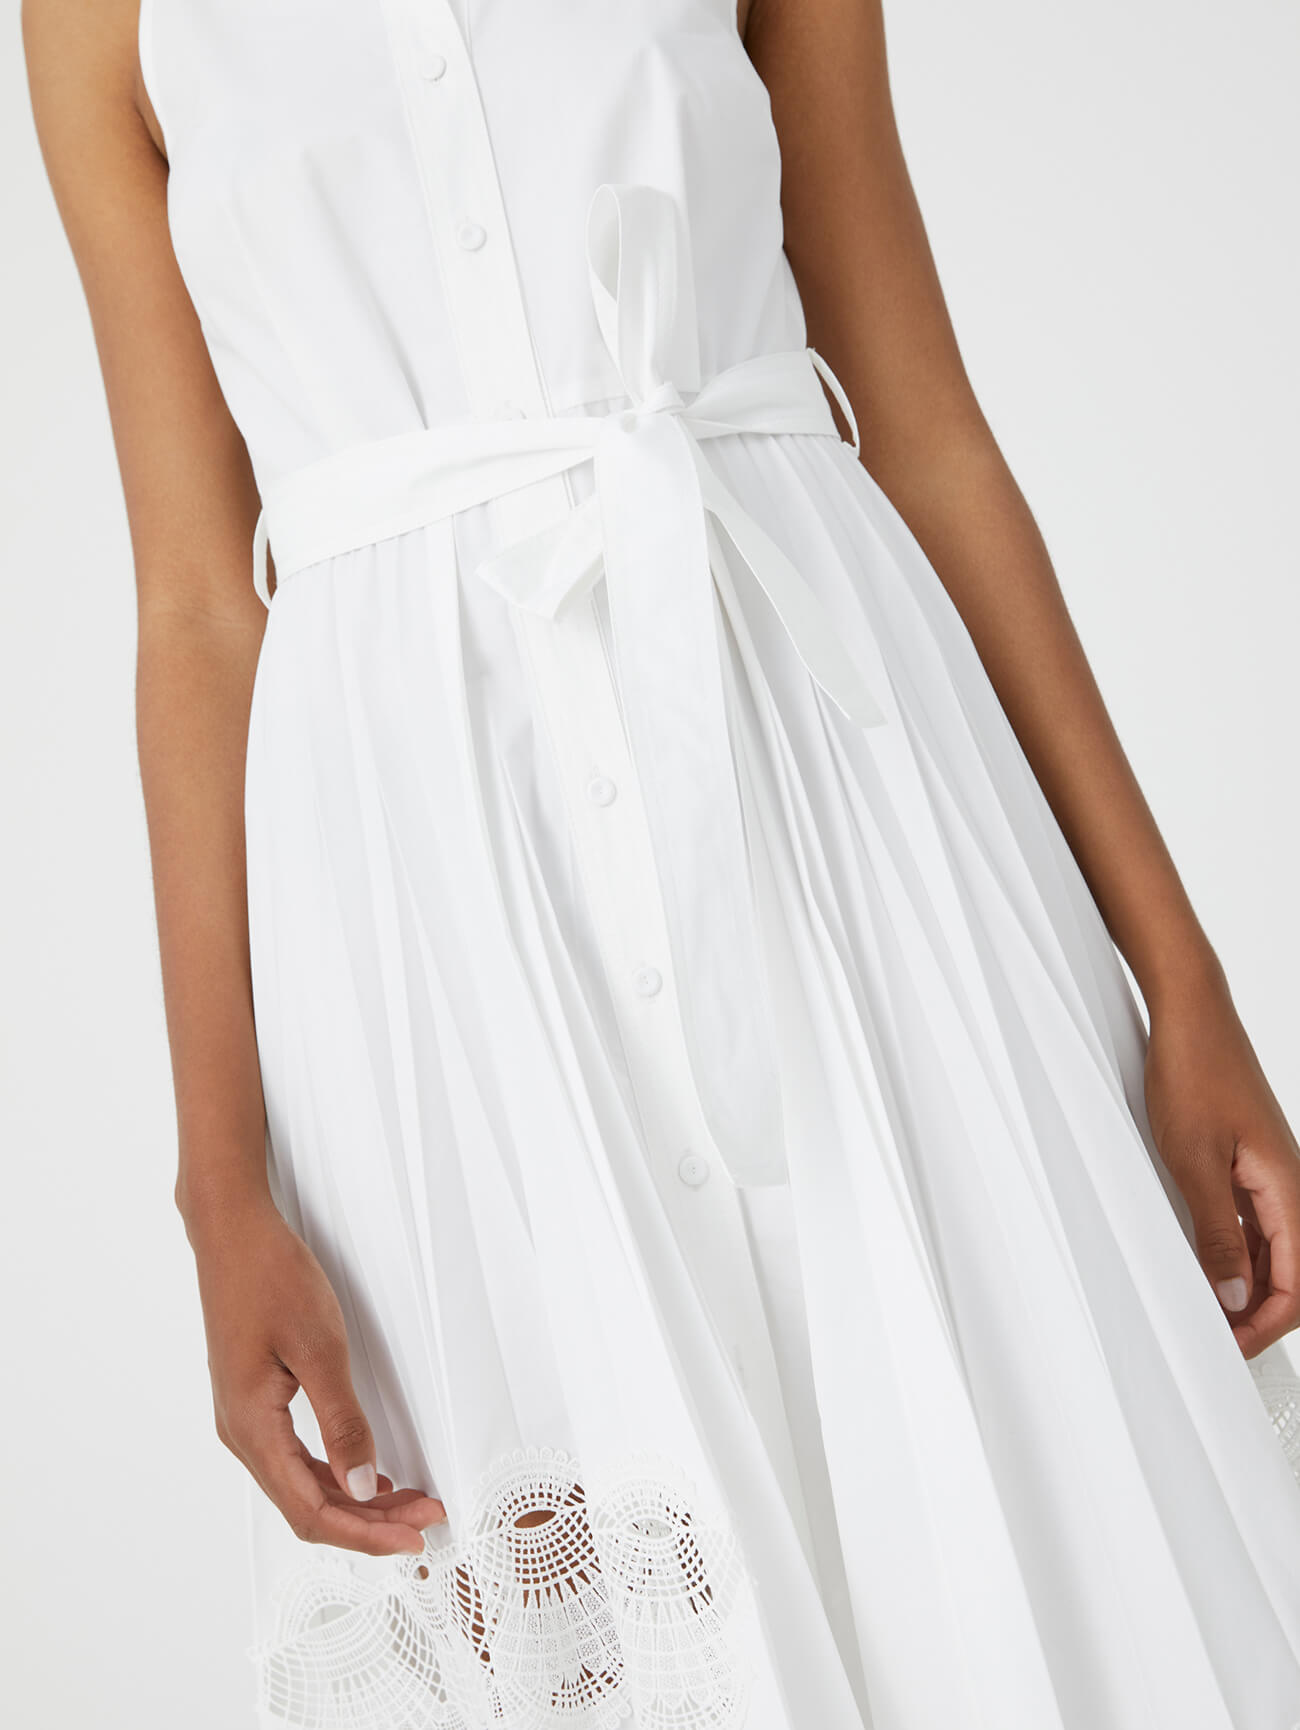 long pleated white dress with lace inserts